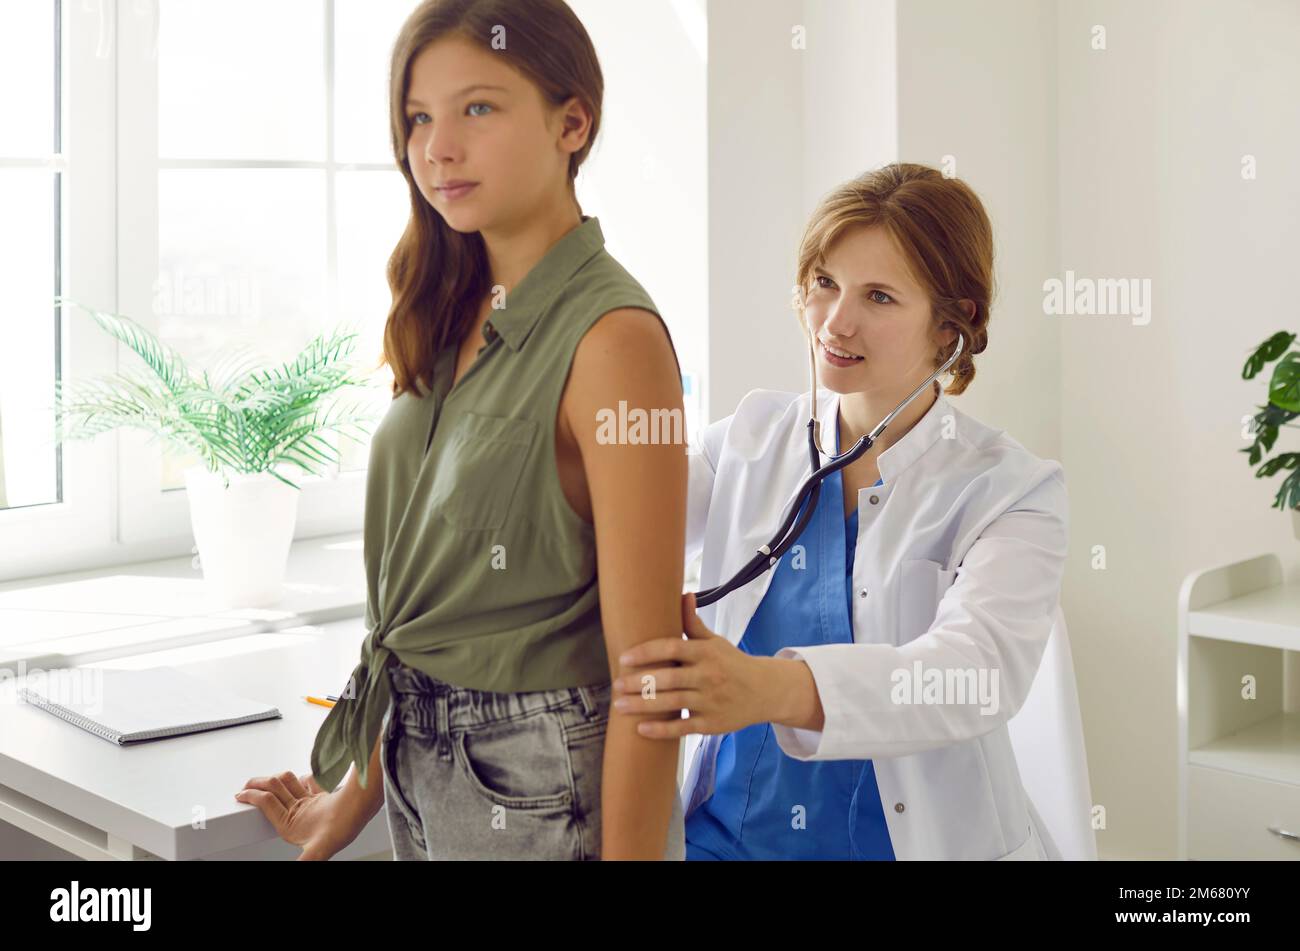 Teen Girl On Checkup Appointment With Young Woman Doctor Examining Her